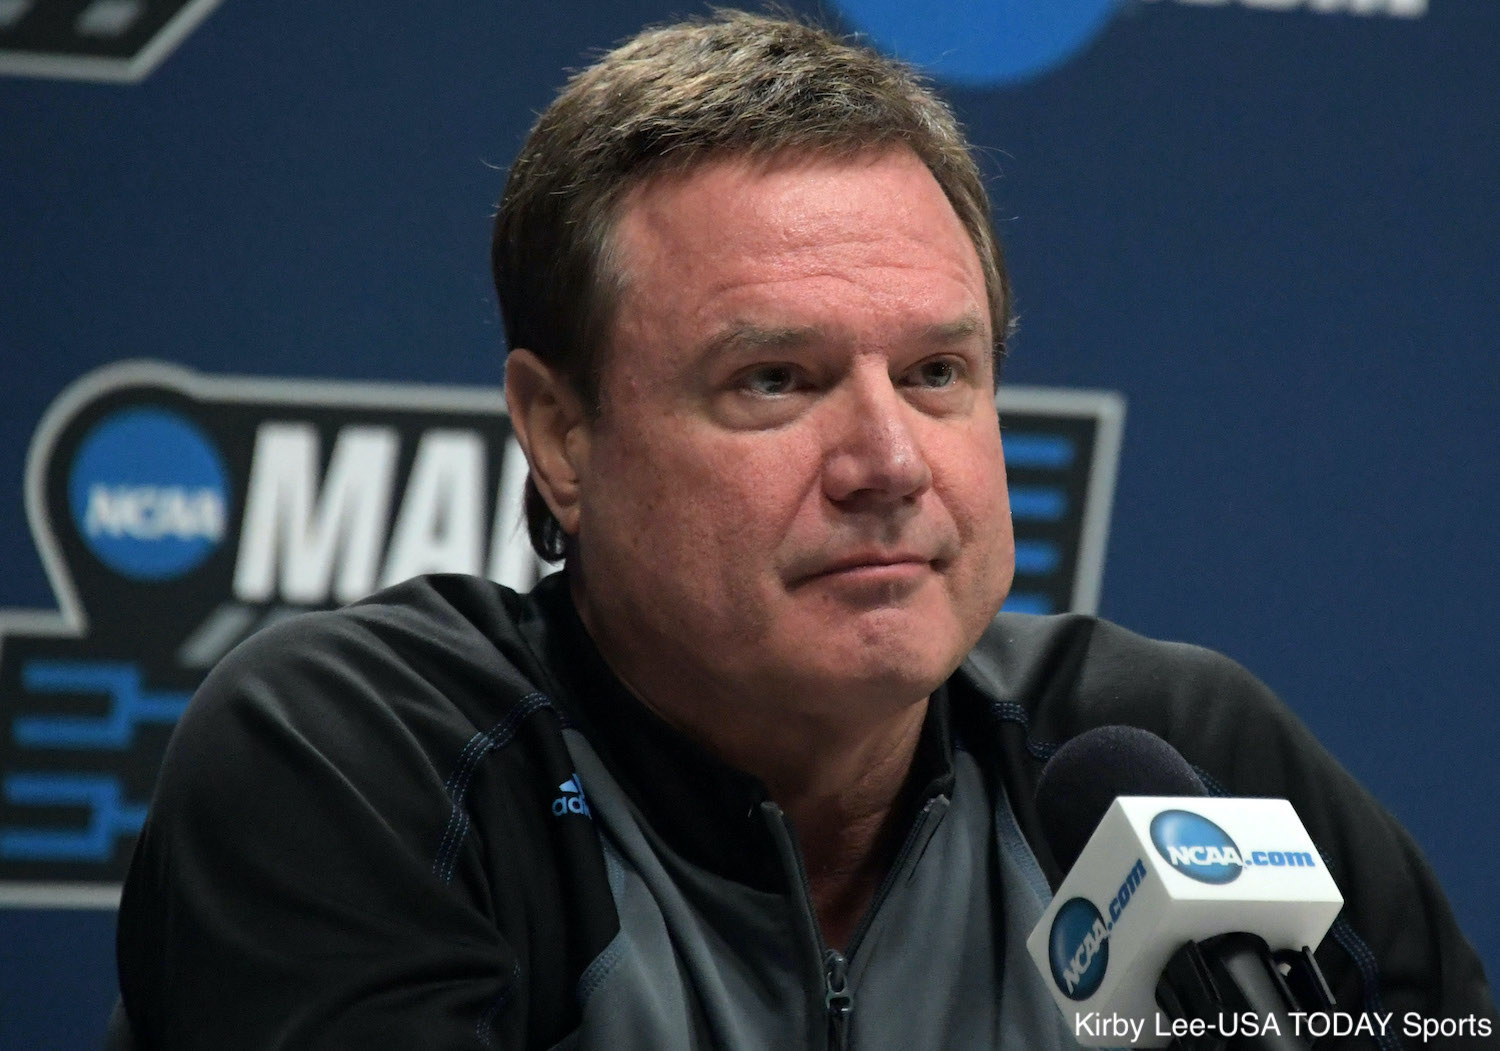 Bill Self's new lifetime contract with Kansas includes surprising clause